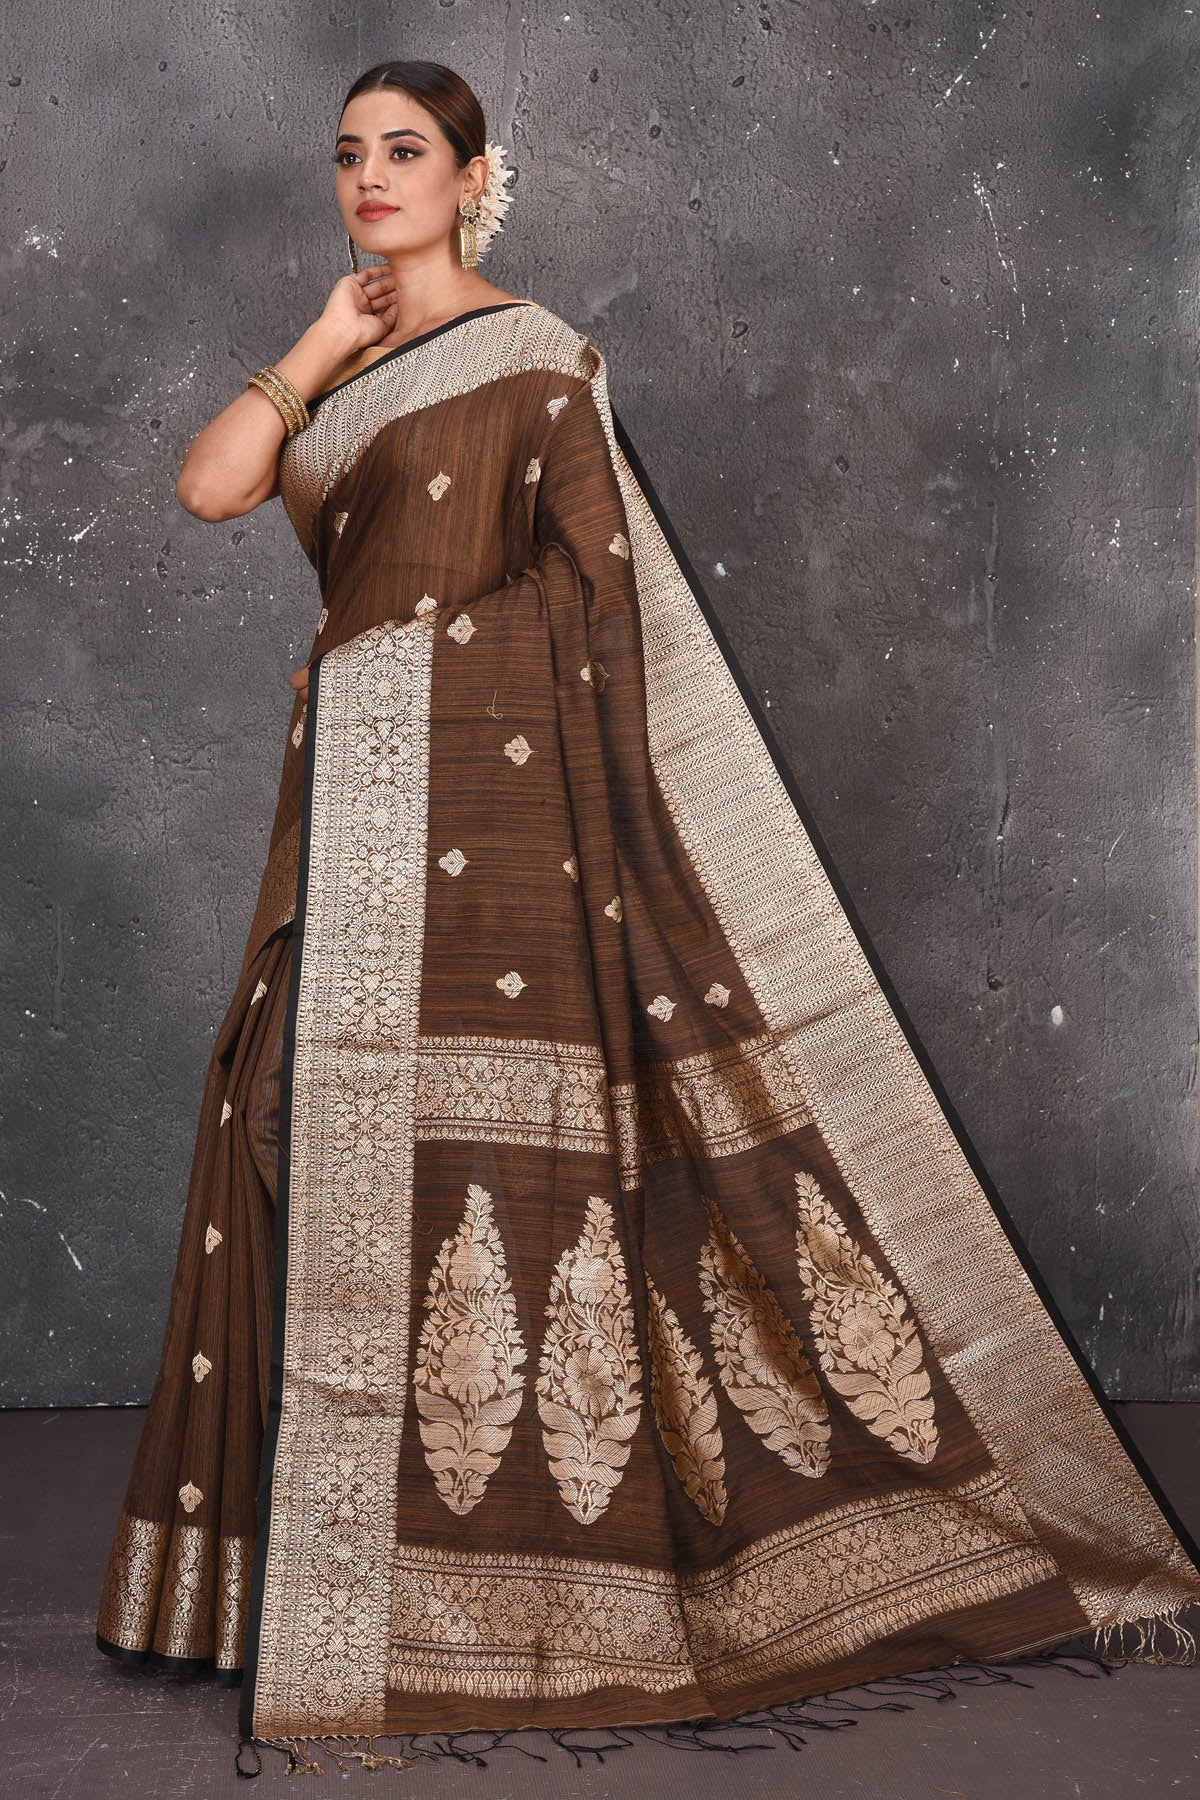 Buy elegant brown zari woven matka Silk Banarasi saree with zari broad border online in USA which has crafted by skilled weaver of Banaras with elegance and grace, this saree is definitely the epitome of beauty and a must have in your collection. Buy designer handwoven banarasi brocade sari with any blouse from Pure Elegance Indian saree store in USA. -Side view.